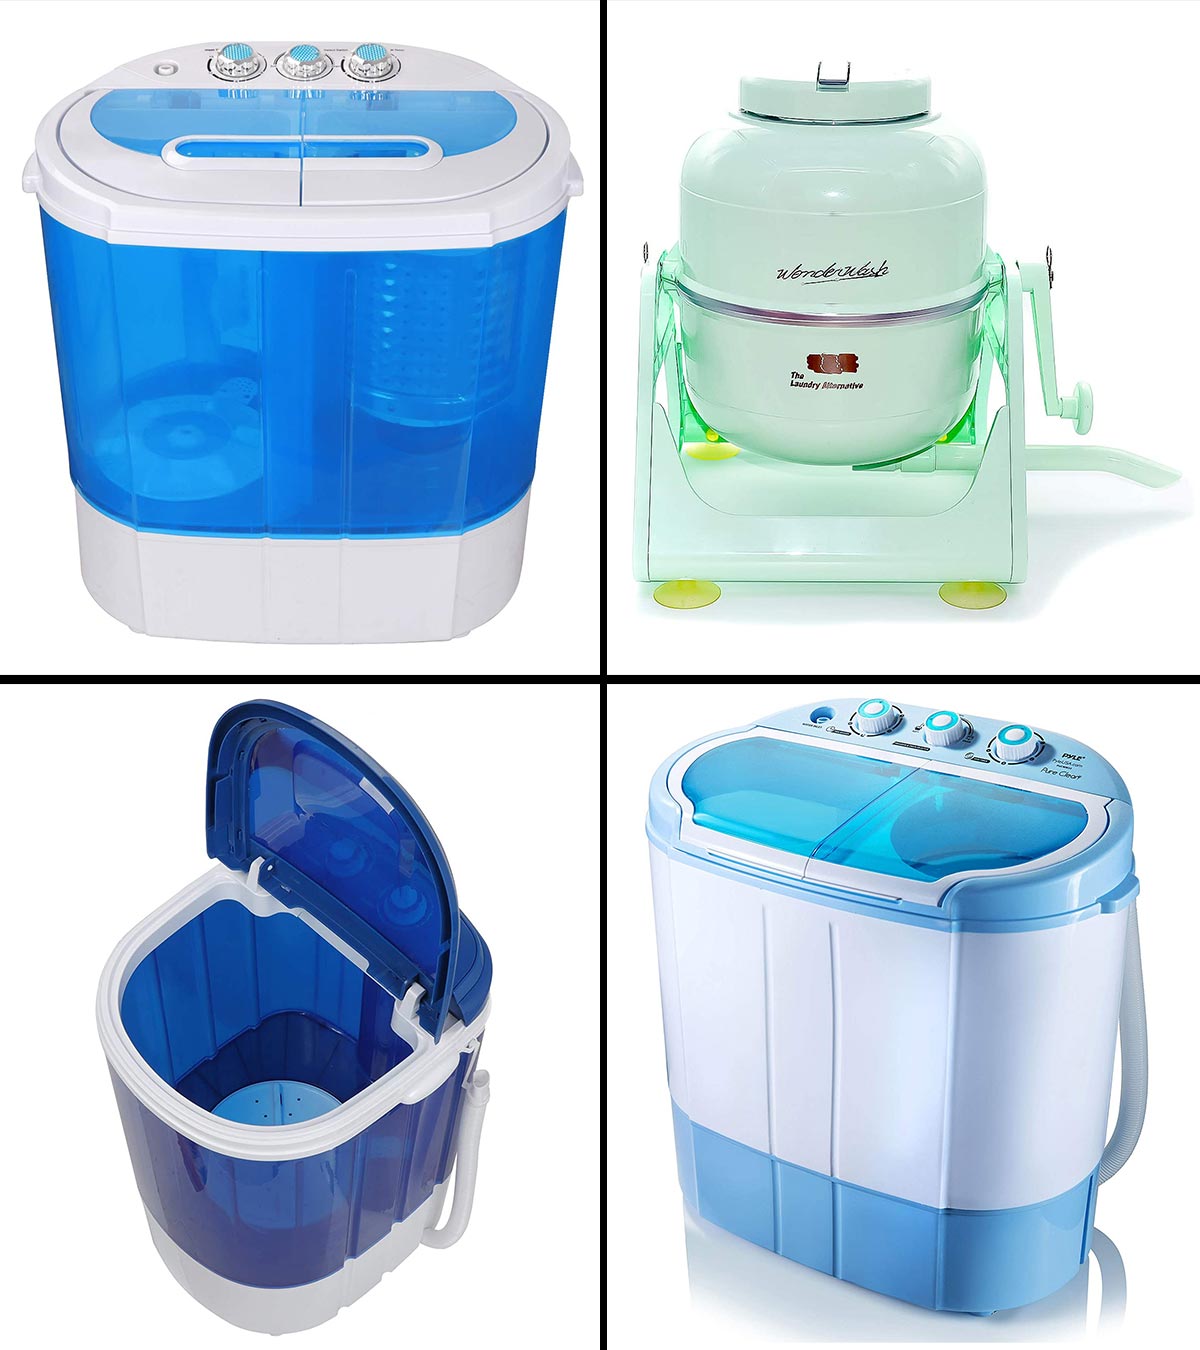 Pyle Compact Home Washer & Dryer, 2 in 1 Portable Mini Washing Machine, Twin Tubs, 11lbs. Capacity, 110V, Spin Cycle w/Hose, Translucent Tub